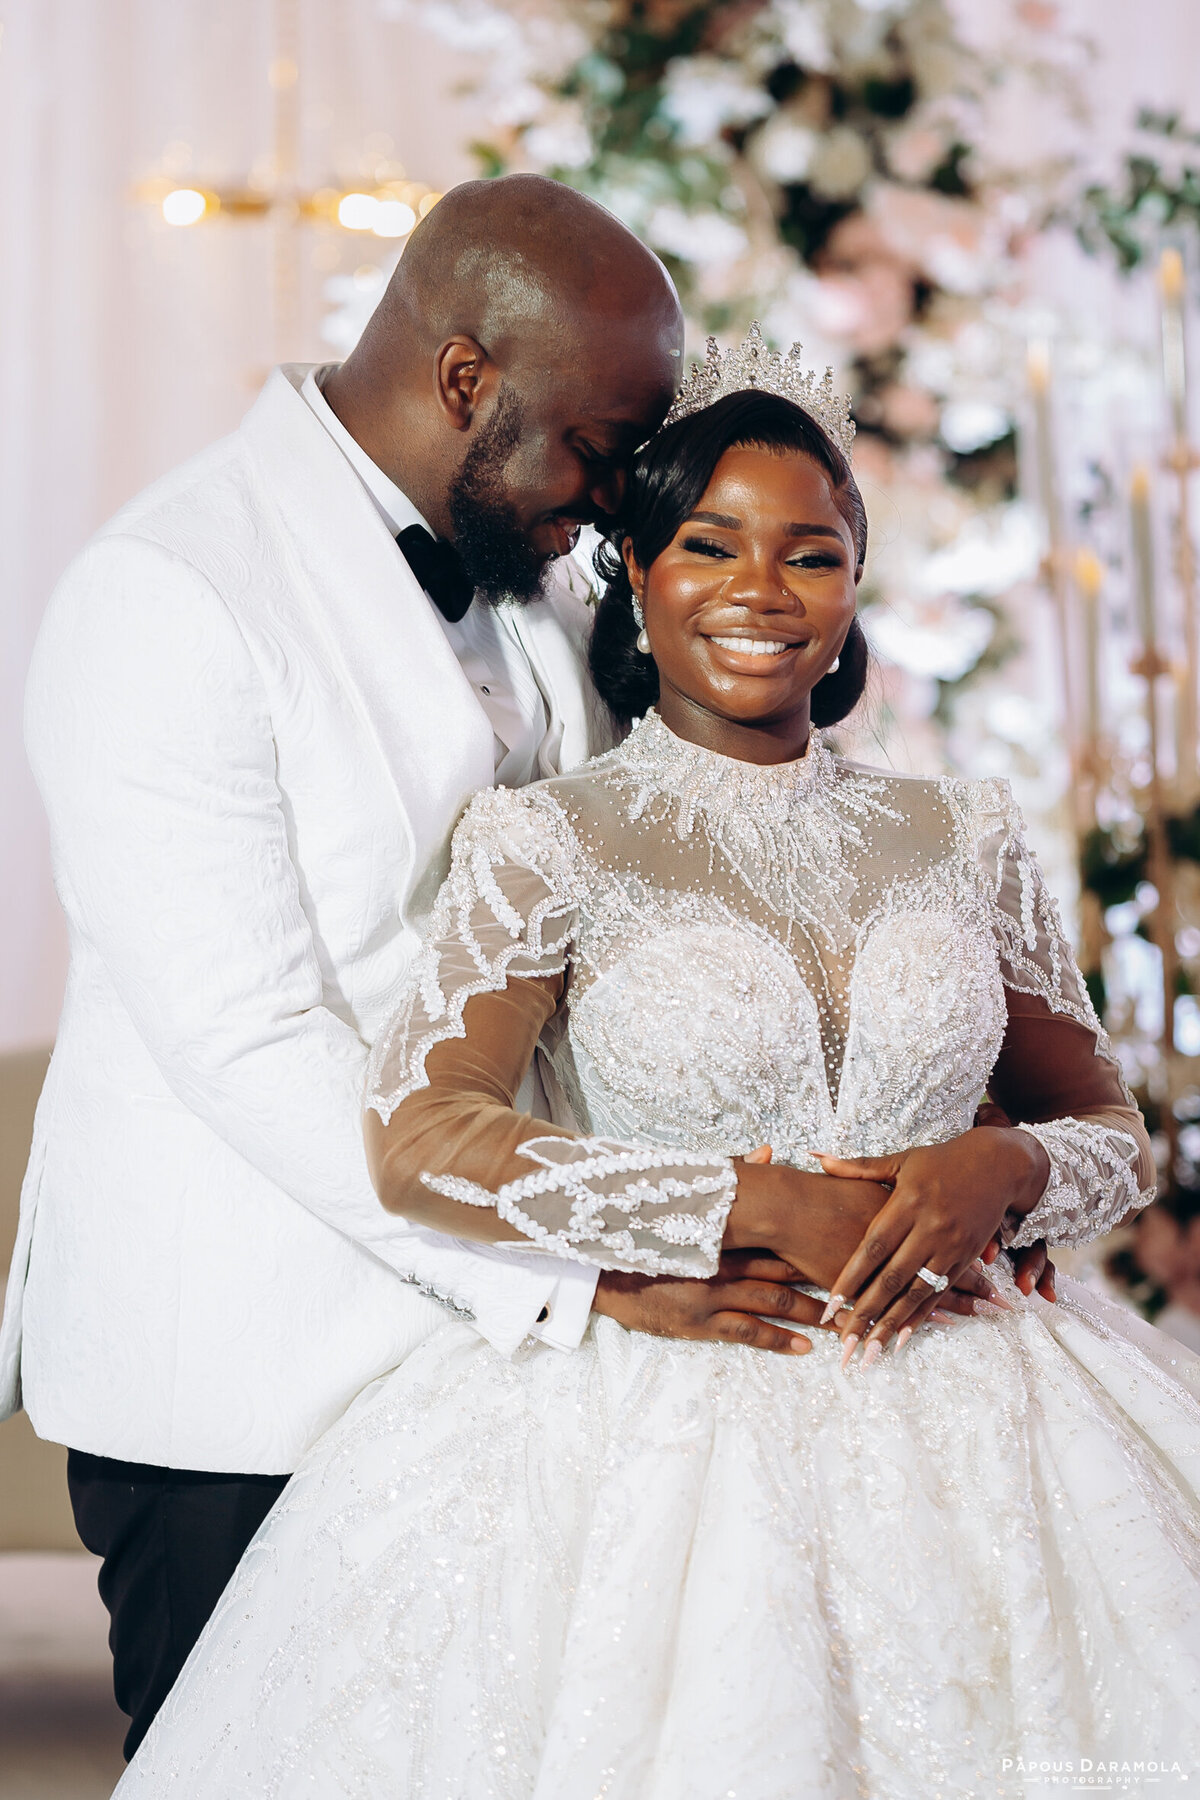 Abigail and Abije Oruka Events Papouse photographer Wedding event planners Toronto planner African Nigerian Eyitayo Dada Dara Ayoola outdoor ceremony floral princess ballgown rolls royce groom suit potraits  paradise banquet hall vaughn 208